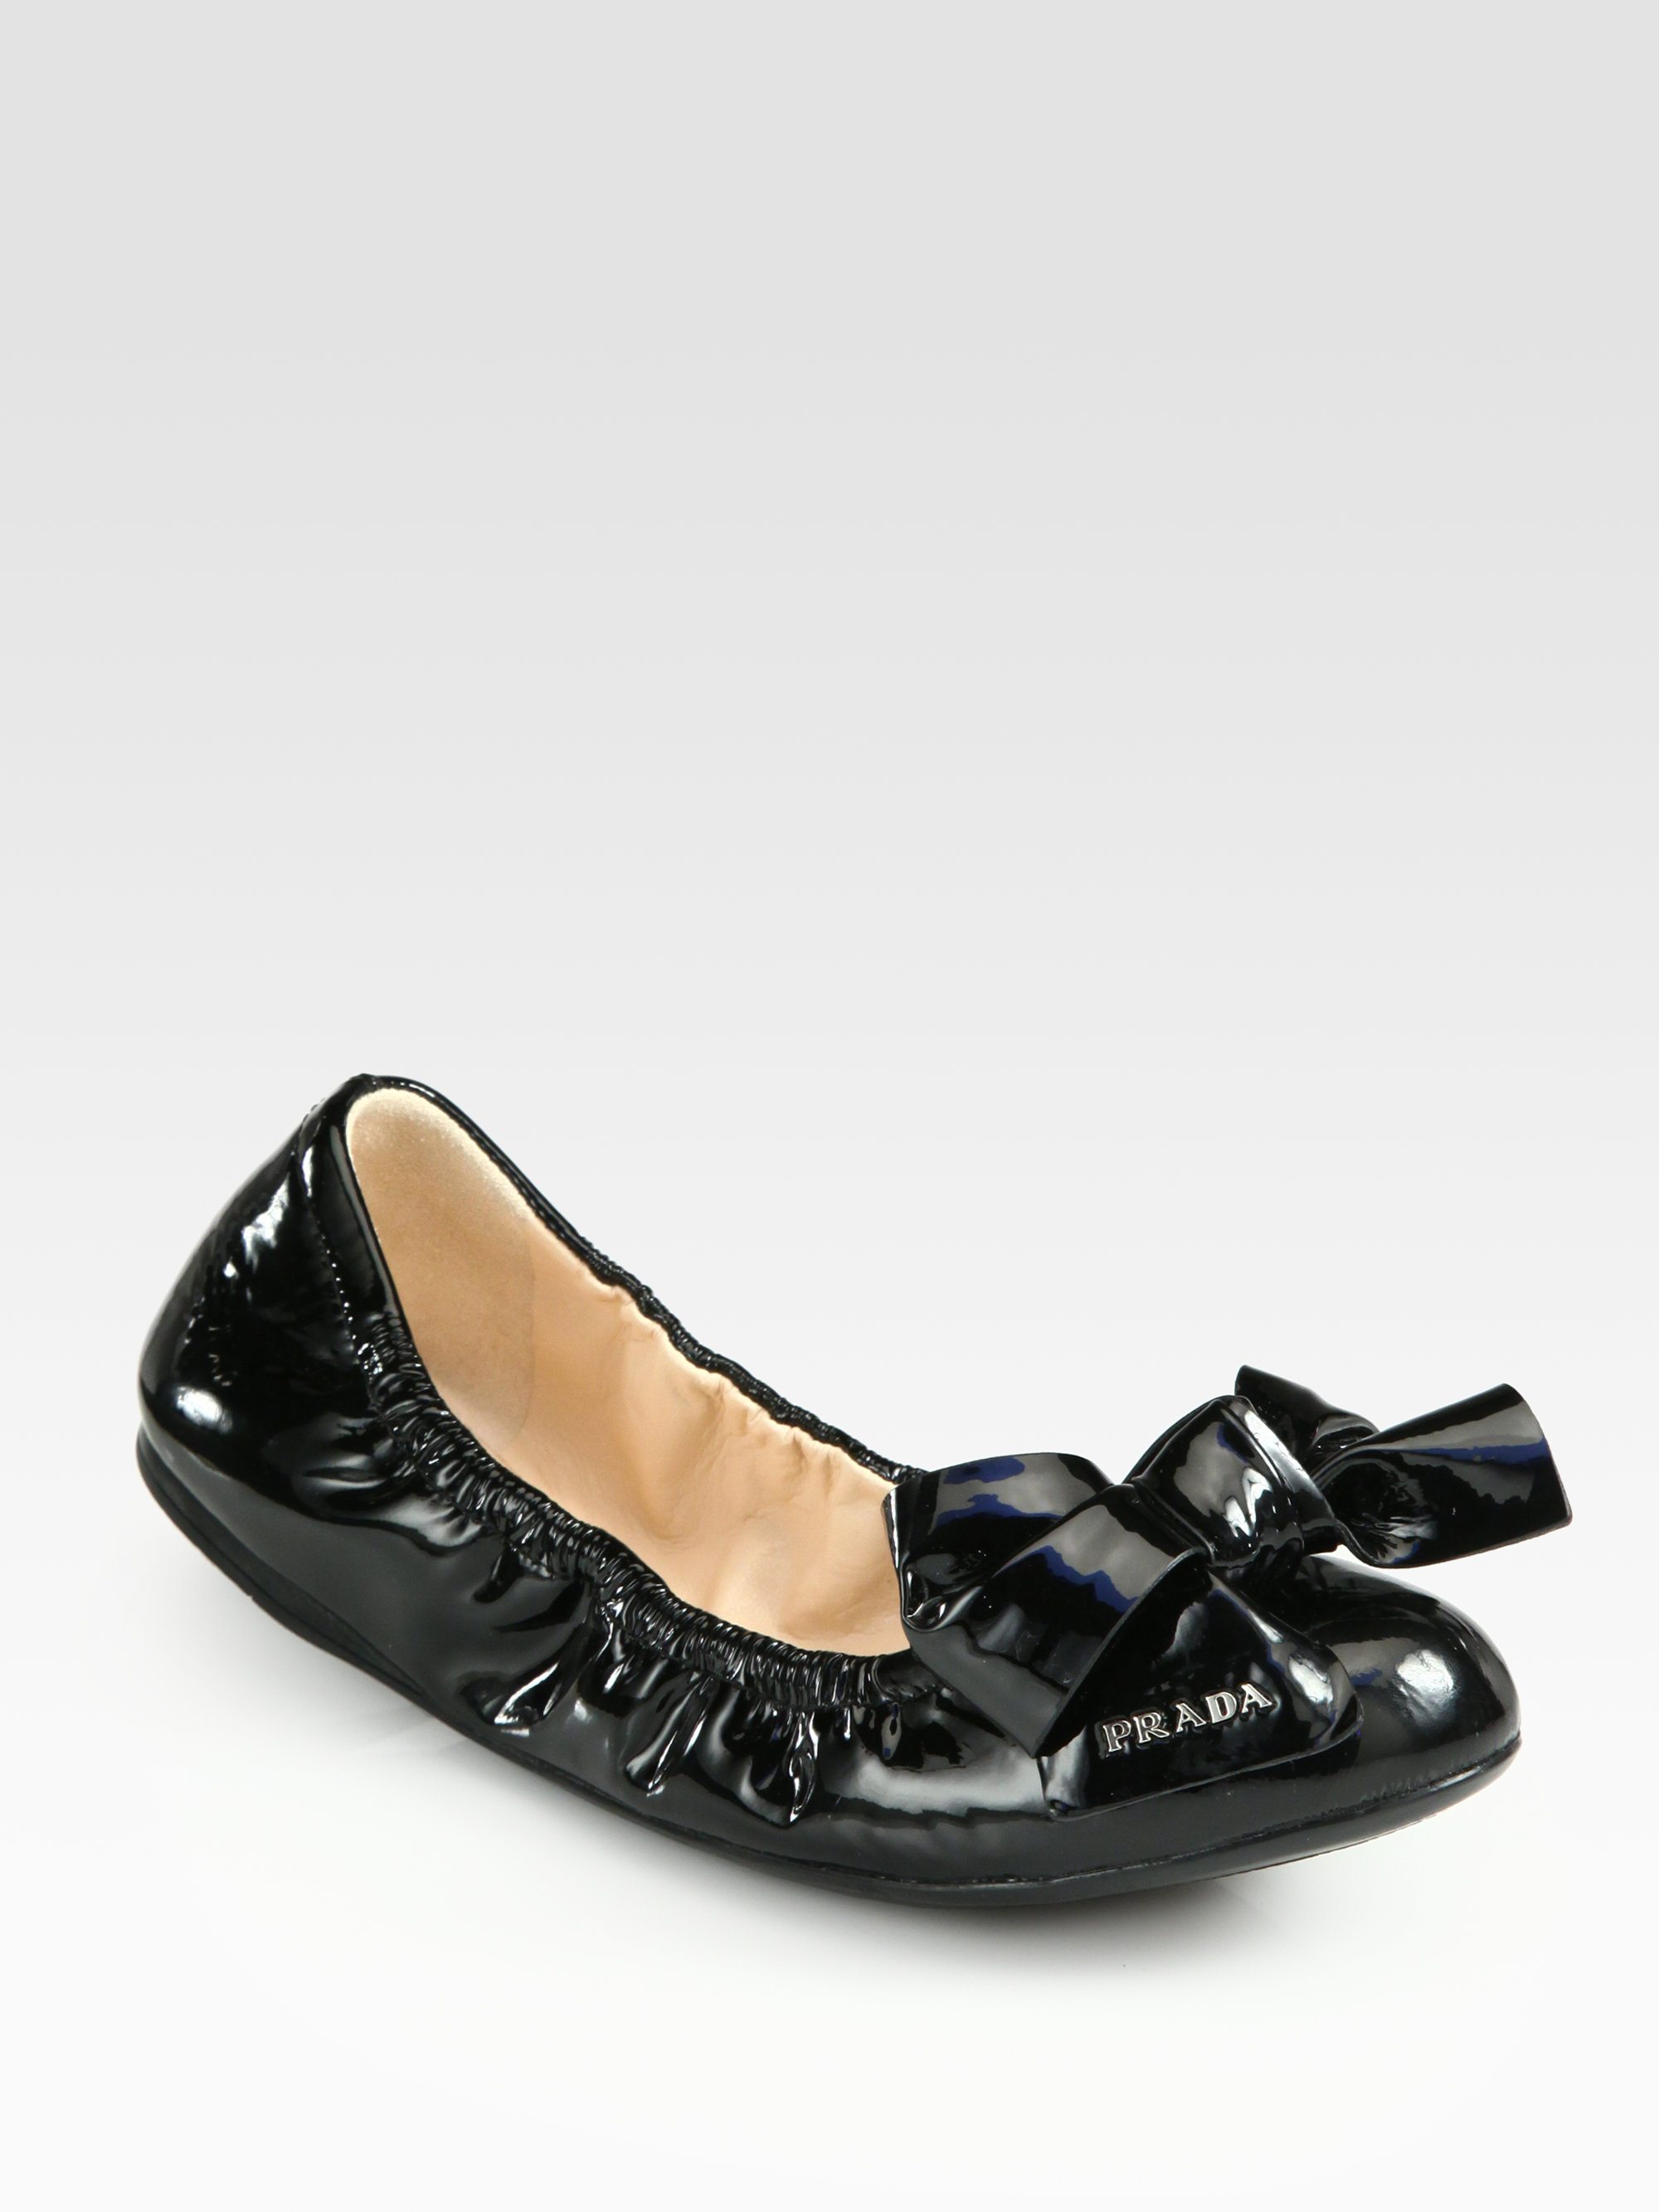 Prada Patent Leather Puffer Bow Ballet Flats in Black | Lyst